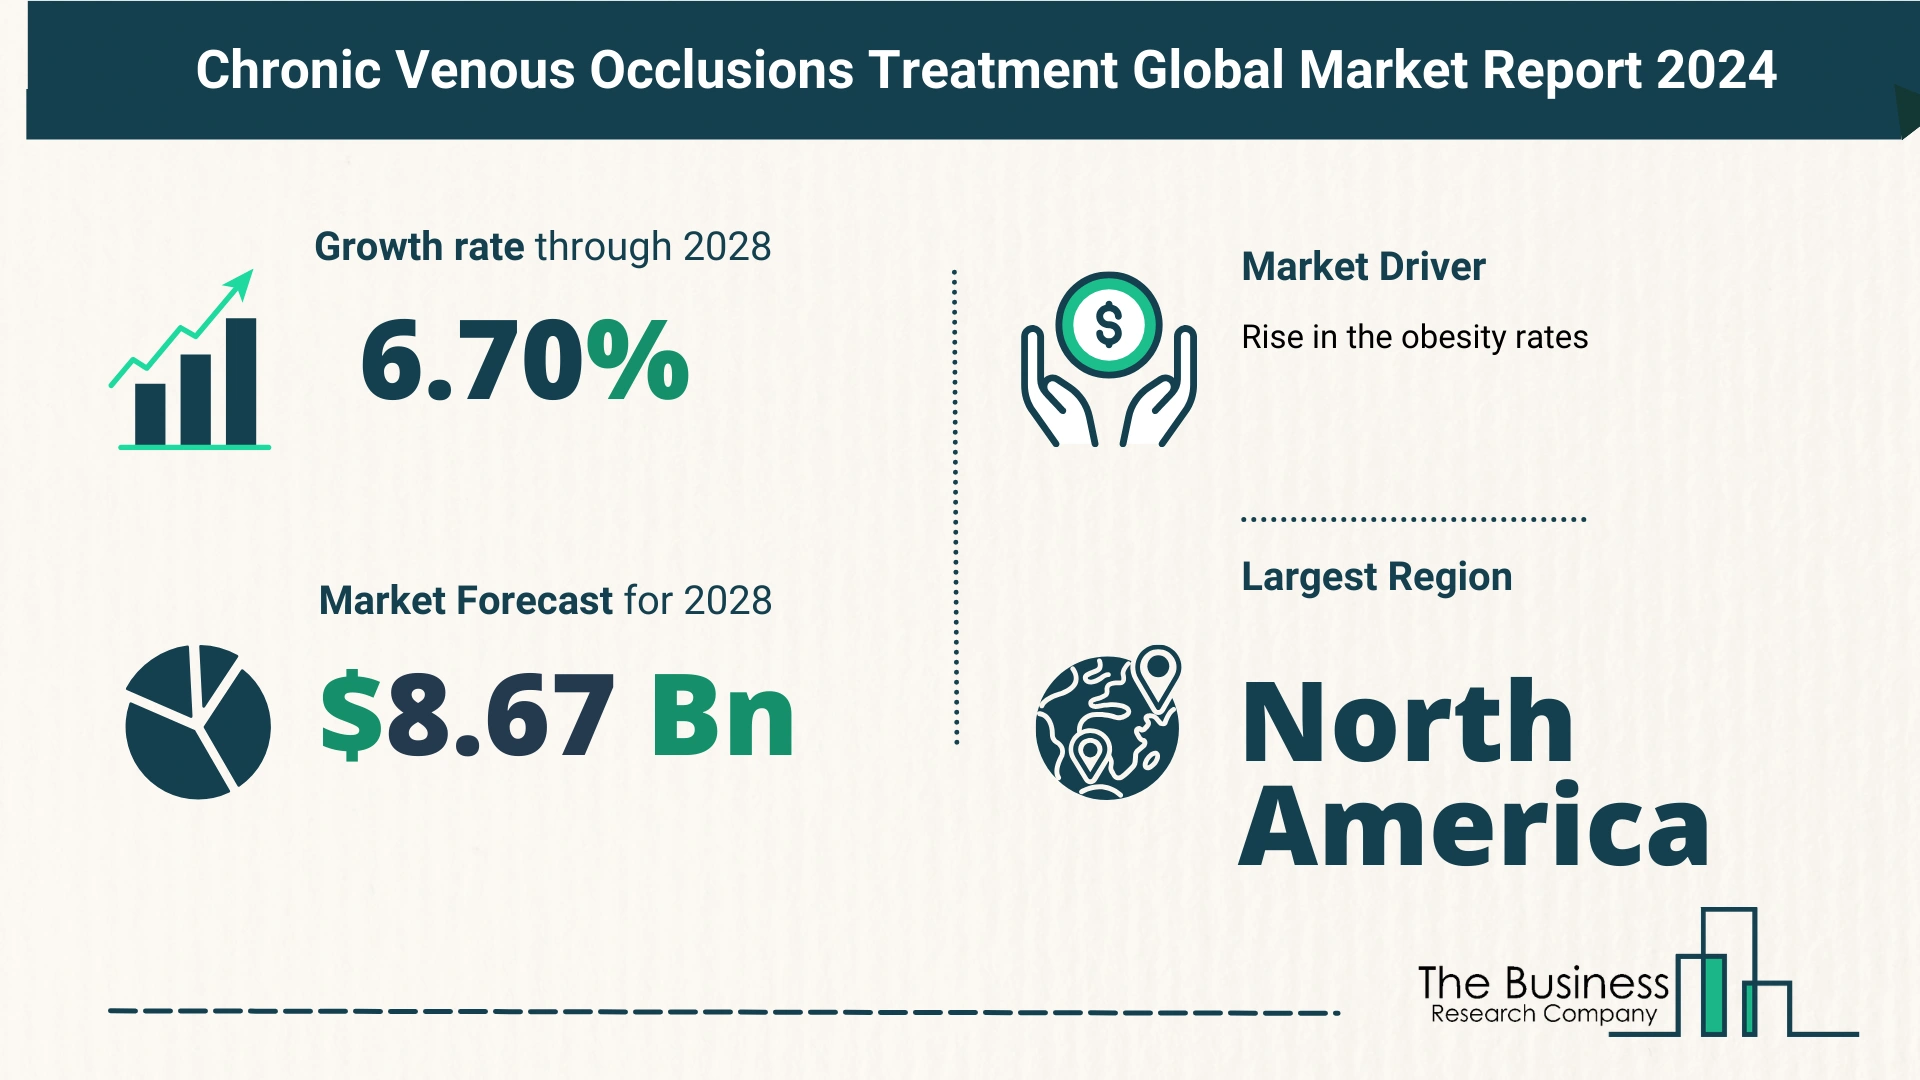 Chronic Venous Occlusions Treatment Market Forecast Until 2033 – Estimated Market Size And Growth Rate